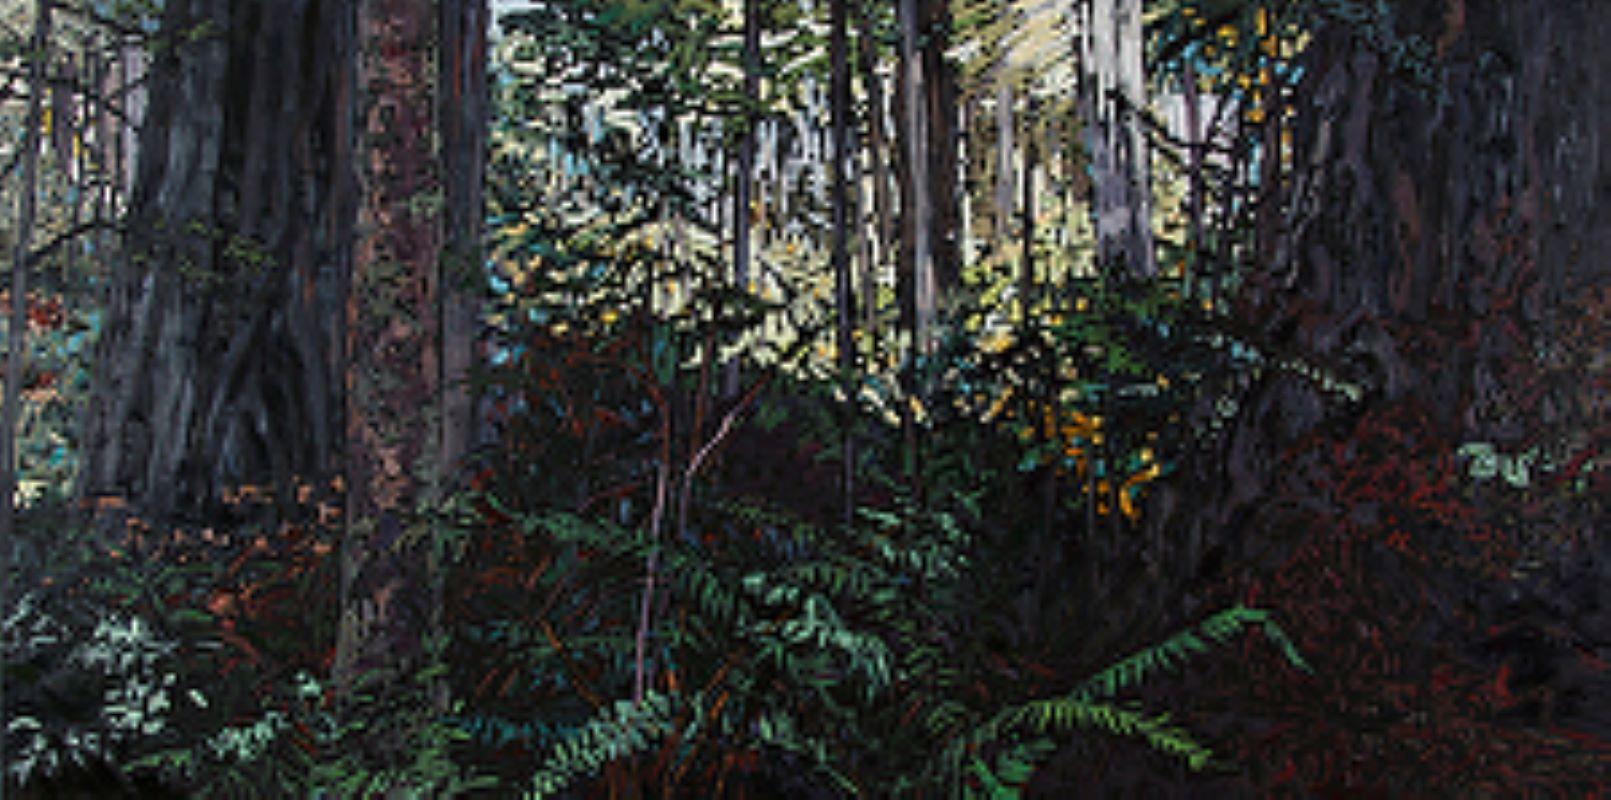 Deb Komitor Landscape Painting - "Deep in the Quiet" Oil Painting